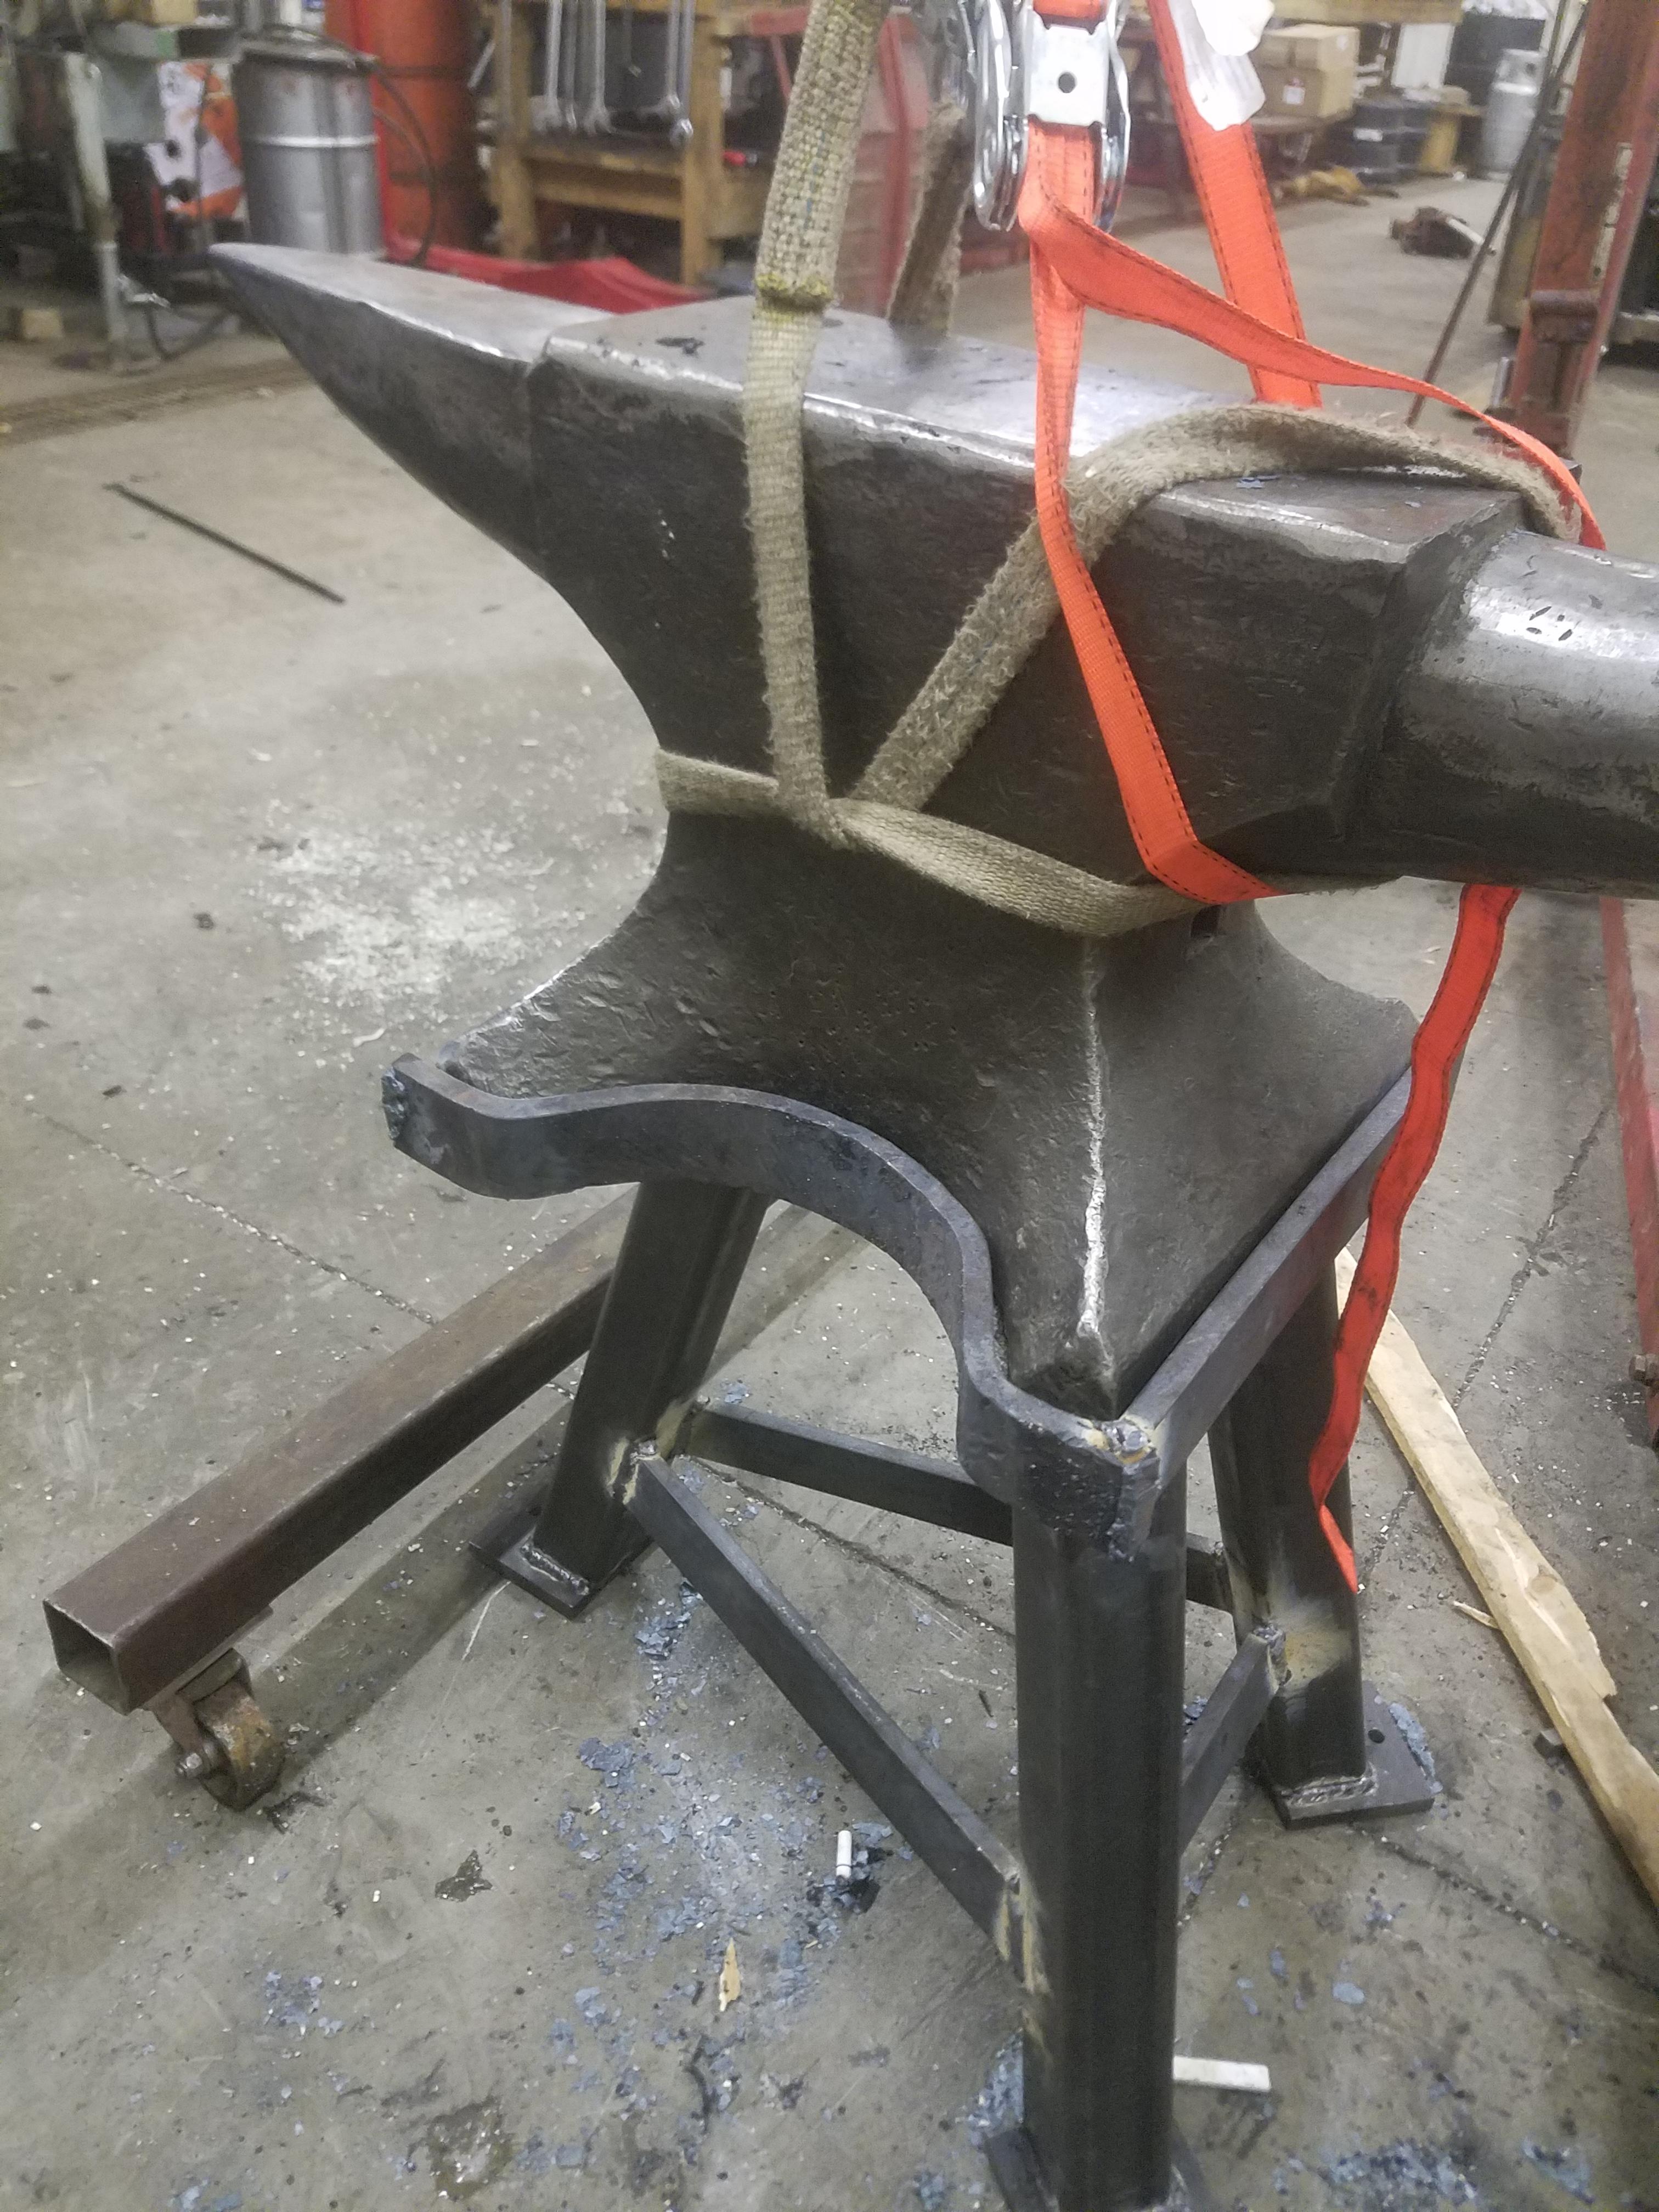 Made an anvil stand for my first anvil - Stands for Anvils, Swage Blocks,  etc - I Forge Iron